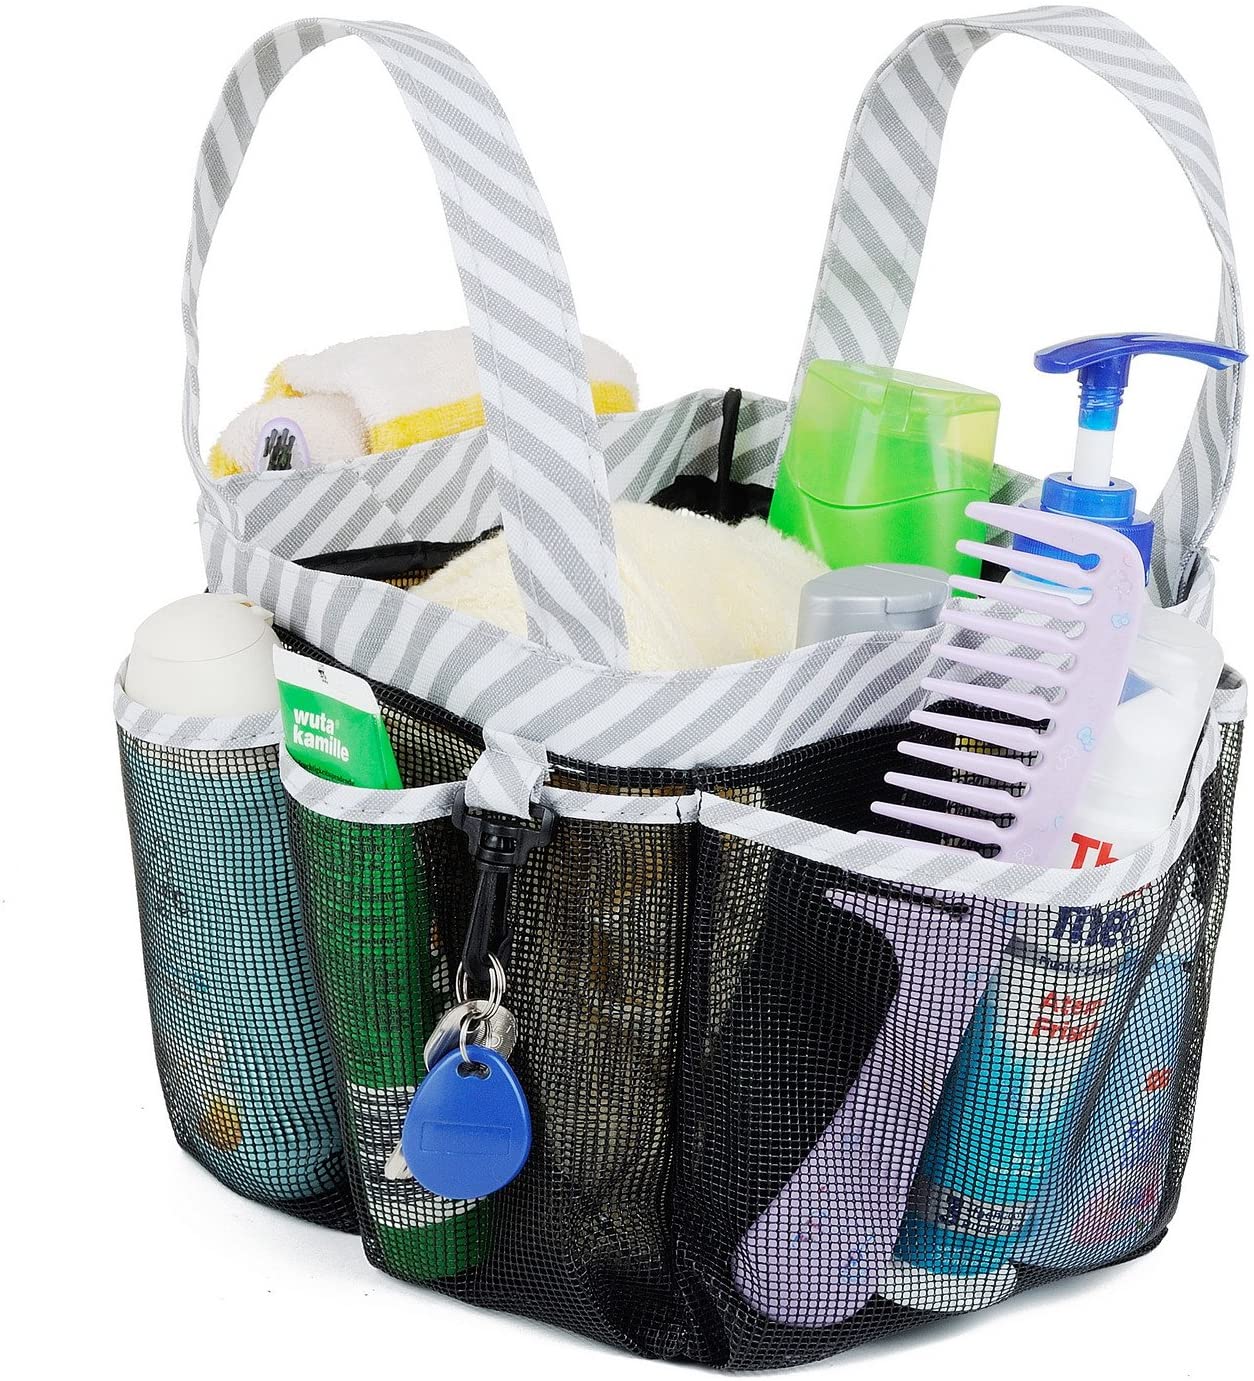 Haundry Mesh Shower Caddy Tote, Large College Dorm Bathroom Caddy Organizer with Key Hook and 2 Oxford Handles,8 Basket Pockets for Camp Gym